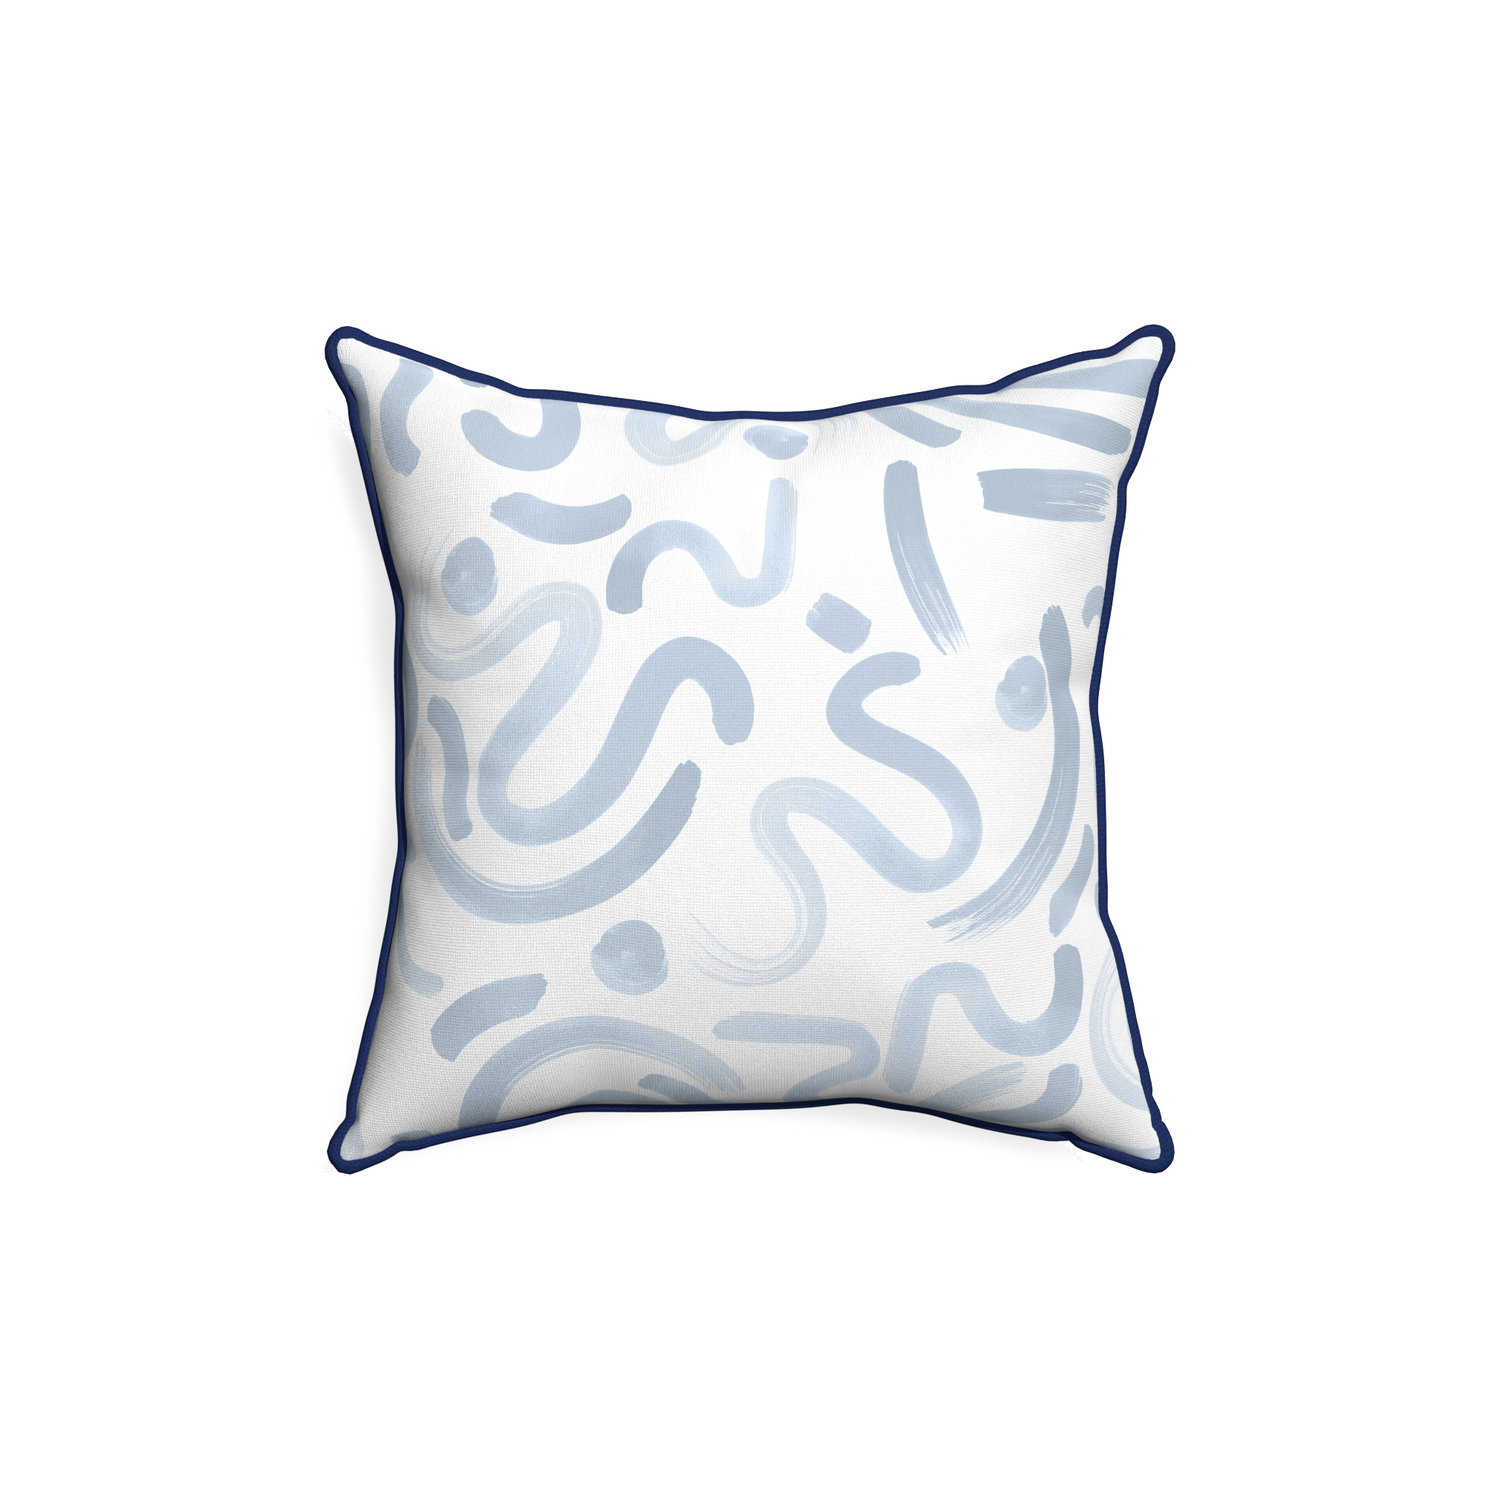 18-square hockney sky custom pillow with midnight piping on white background